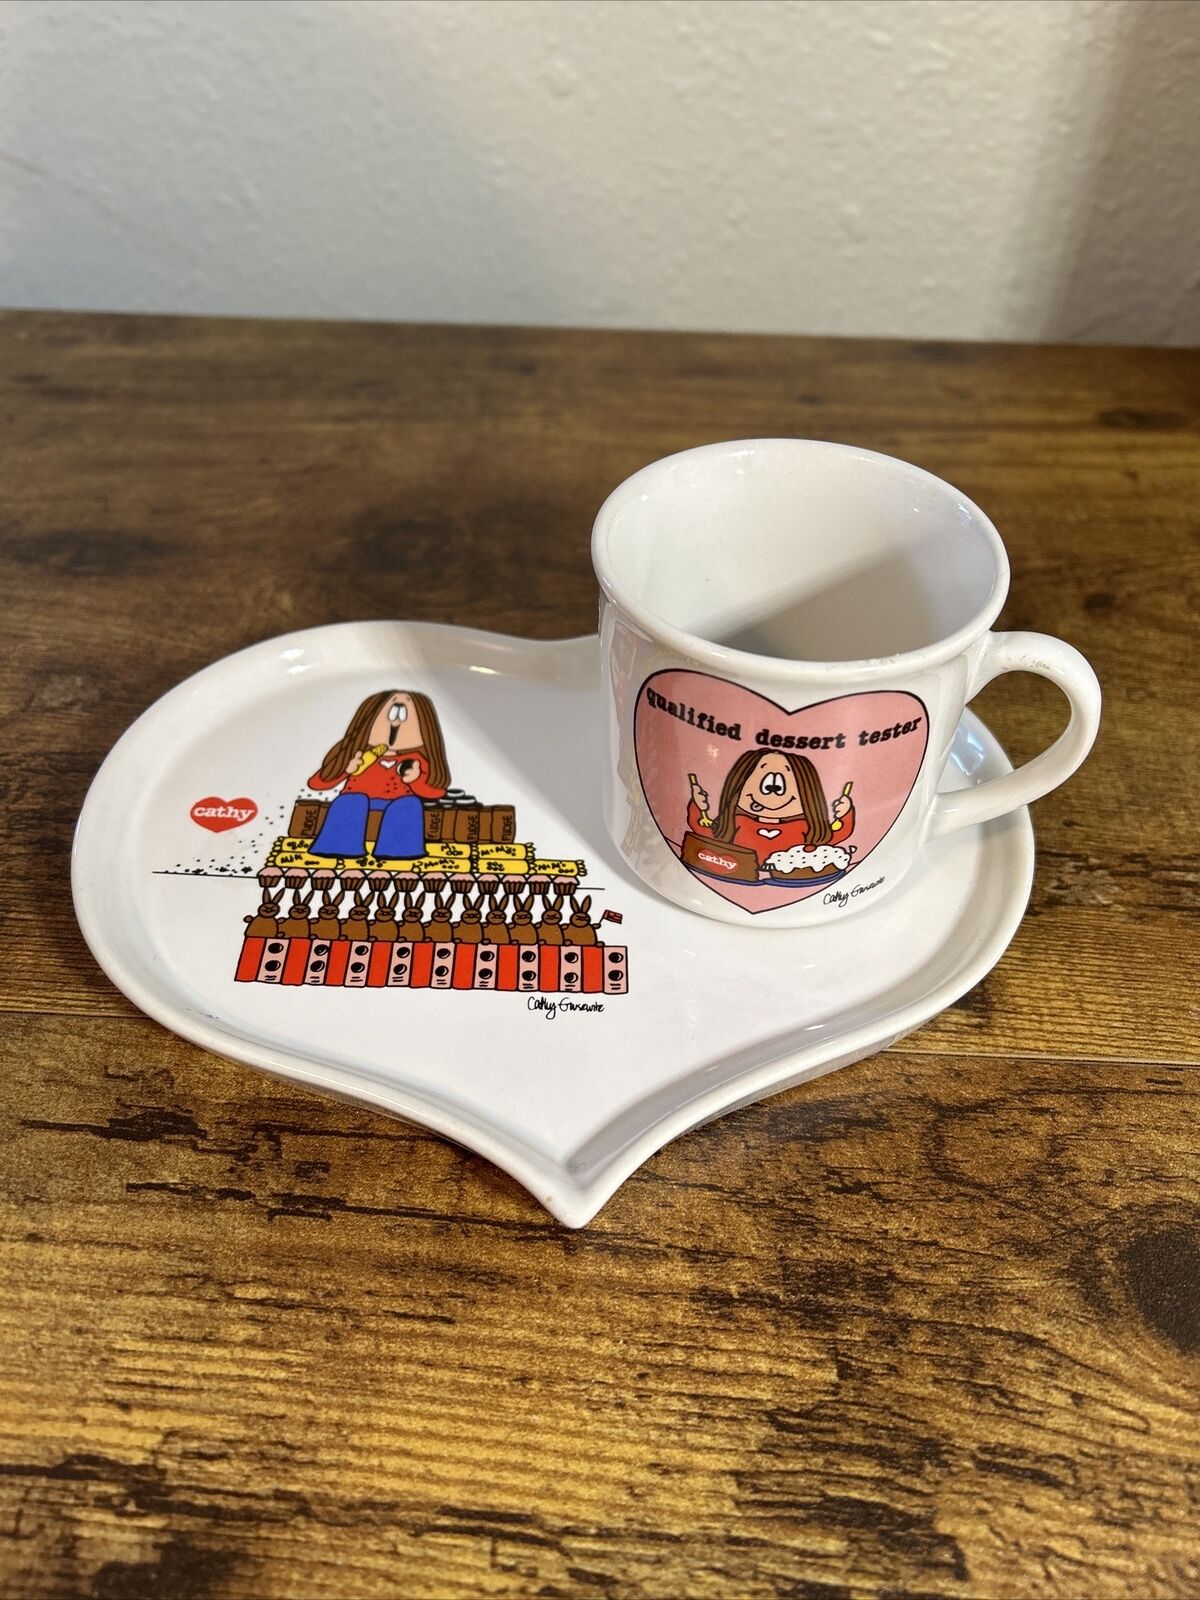 Vintage Cathy Comic Qualified Dessert Tester Heart Shaped Dish & Cup Stoneware